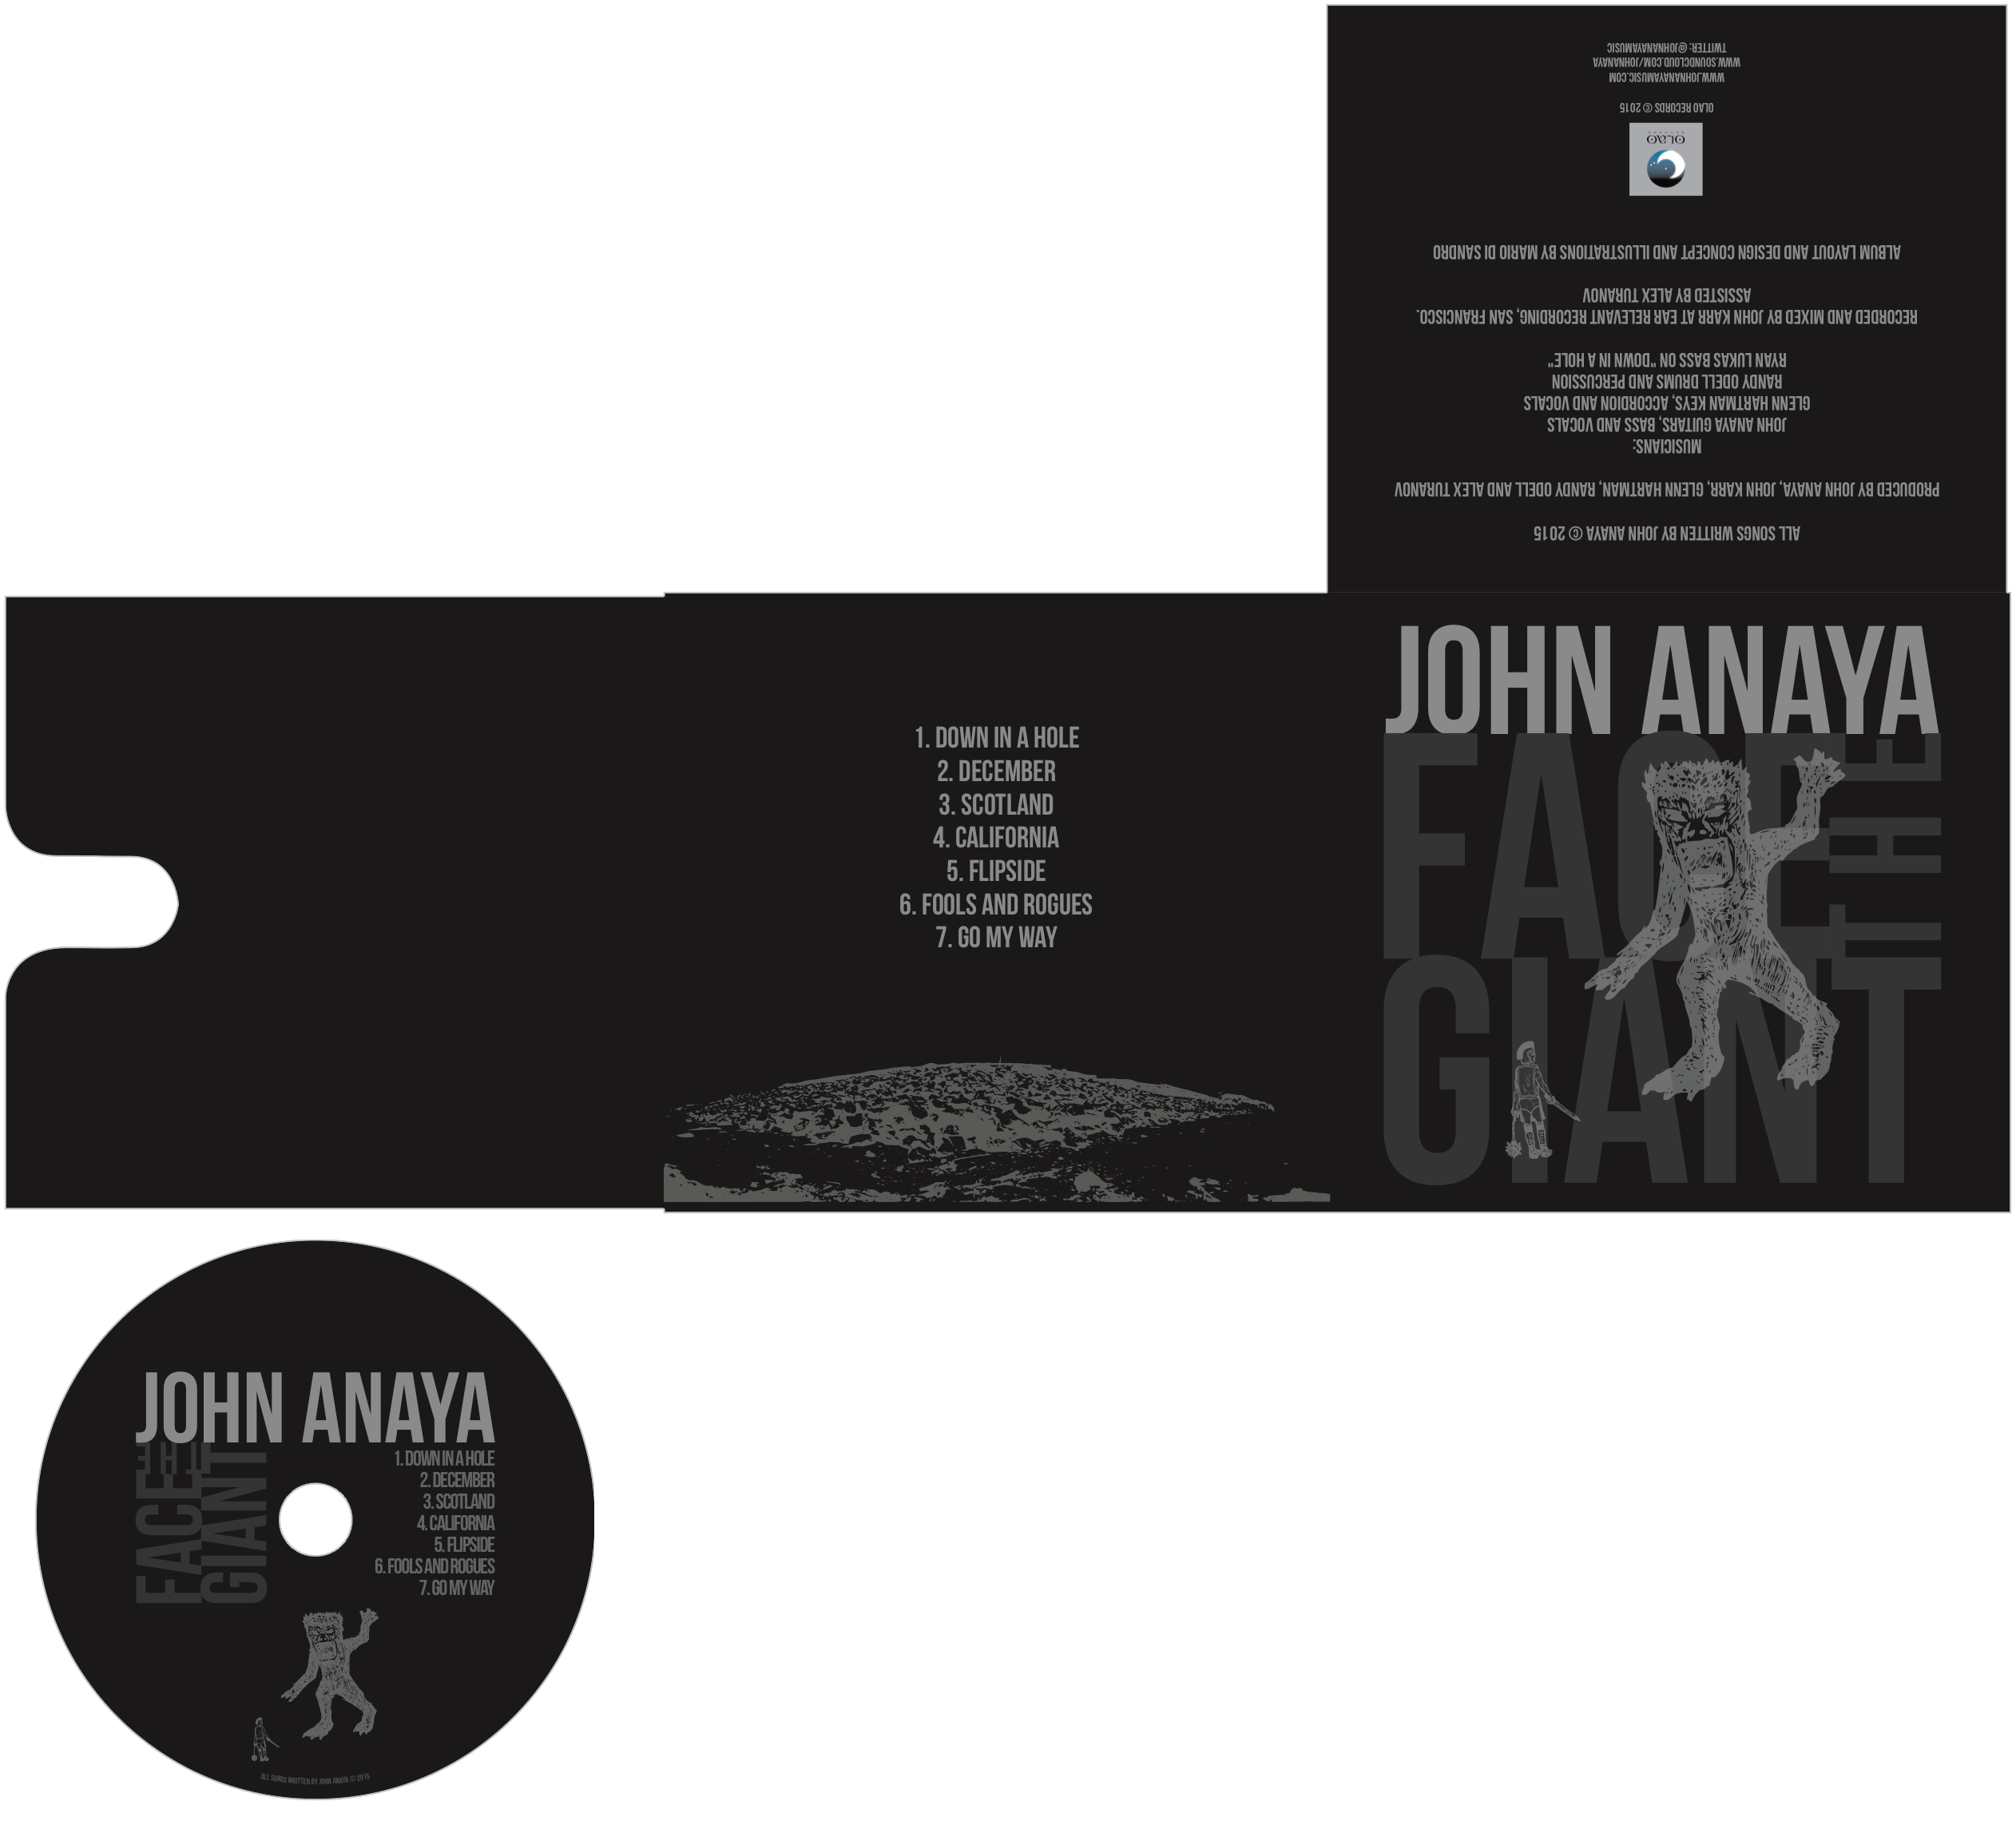 Client: John Anaya, musician based in Scotland, UK and San Francisco, CA. Description: Designed and art directed his album artwork layout and cd design, sent off to printers to be distributed worldwide.